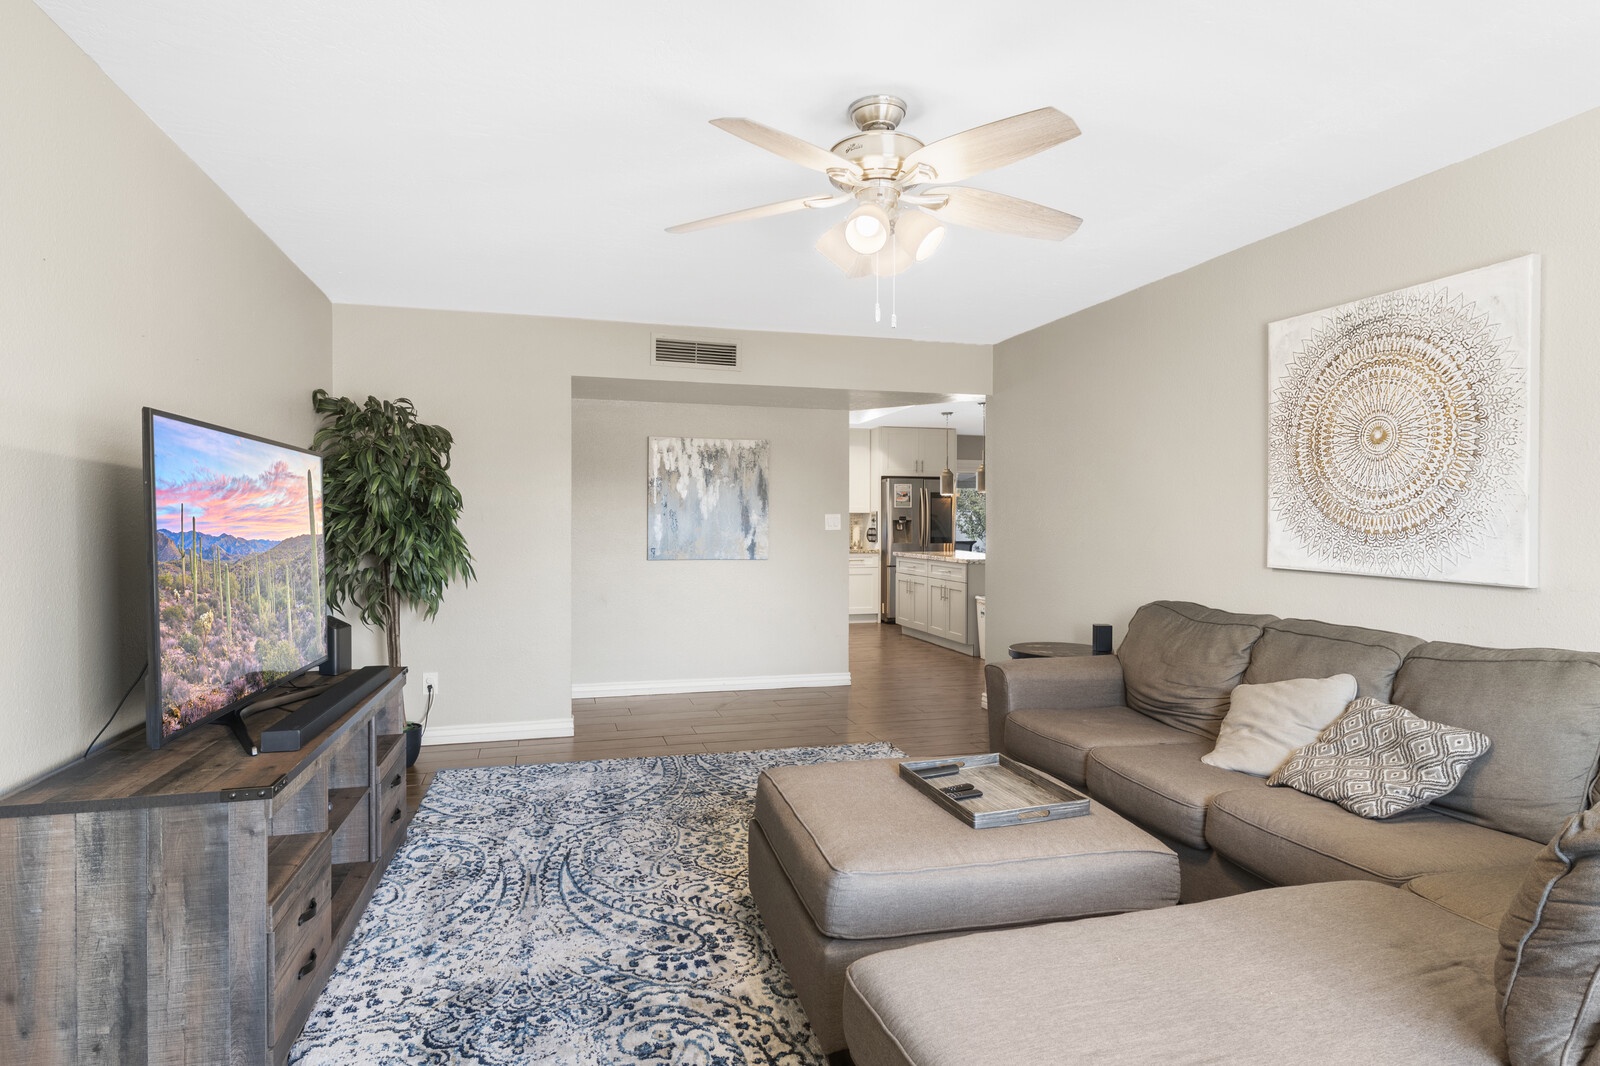 You'll find a large sectional sofa and huge flat screen tv connected to the web for Netflix and Hulu. There is a large sofa sectional with plenty of seating for your entire group to relax.